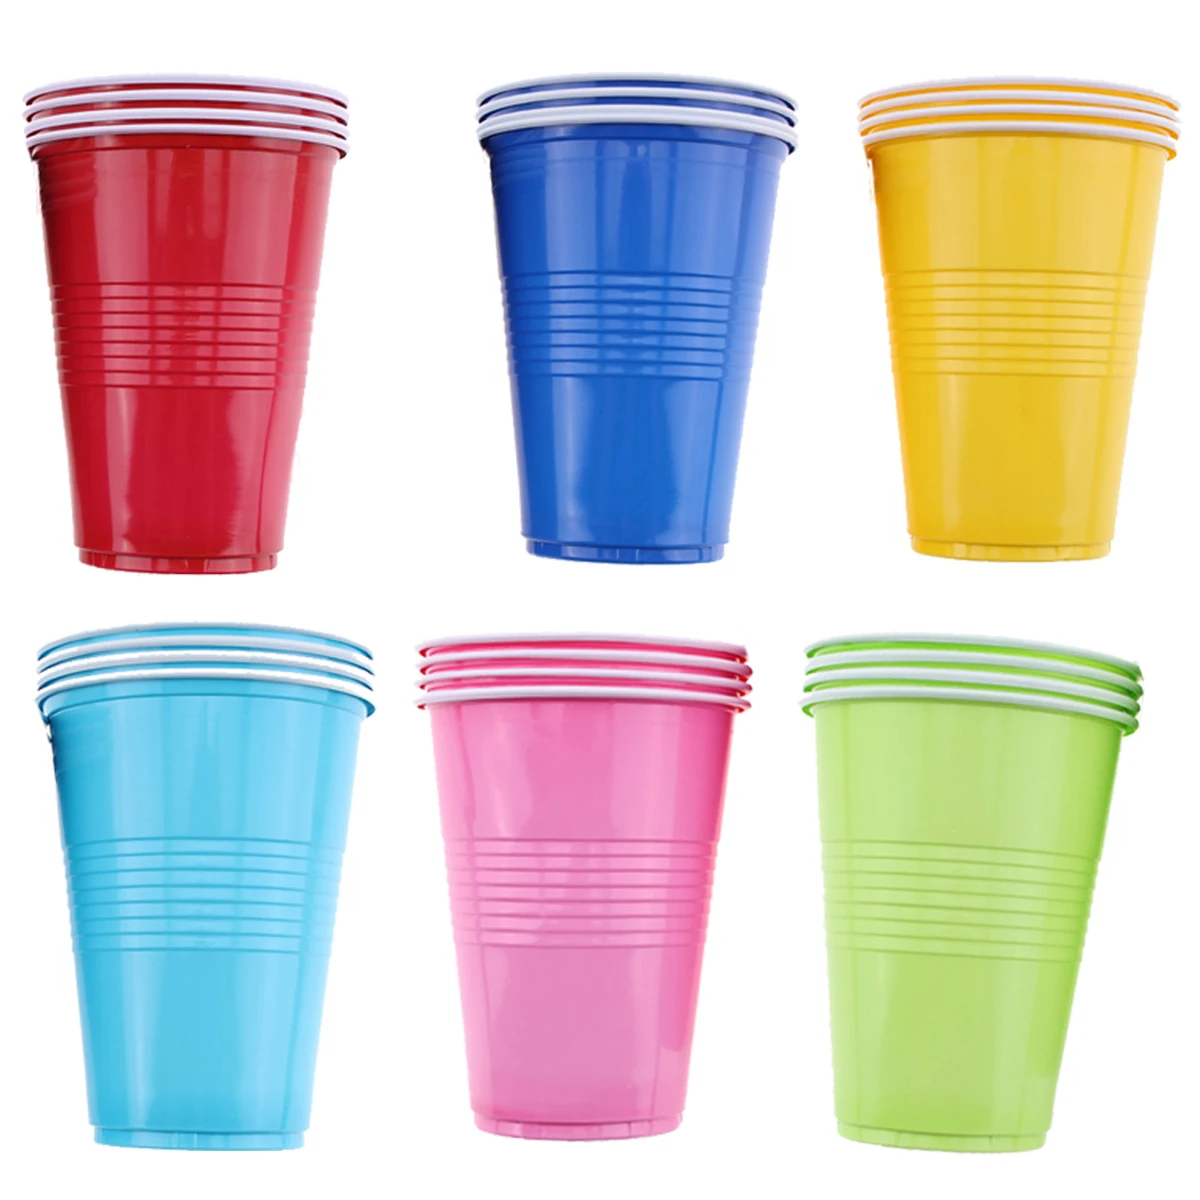 Disposable Cup Pink Green Blue Red Color High Quality Plastic Cup Wed  Banquet Birthday Party Event Tableware Supplies Decor